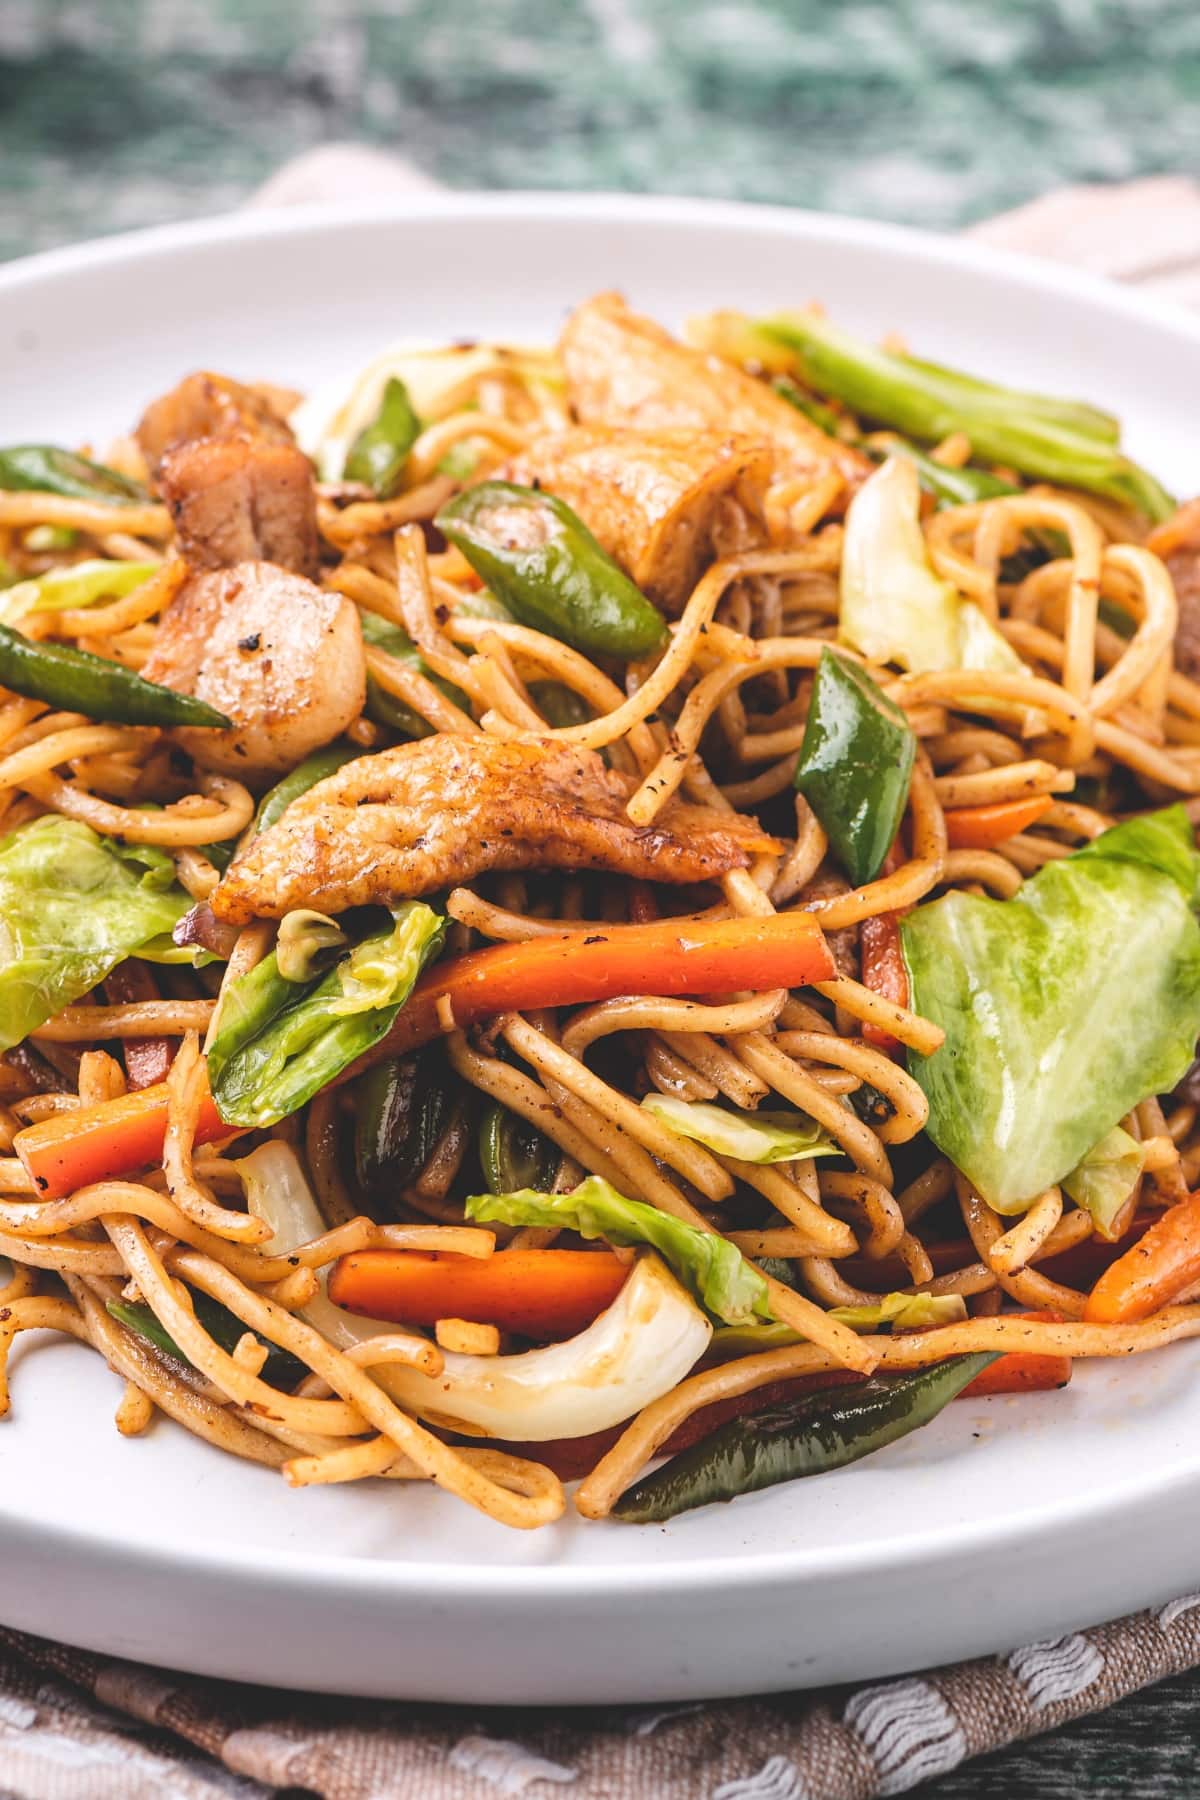 Filipino Pancit with Pork and Vegetables Including Carrots, Cabbage and Green Beans